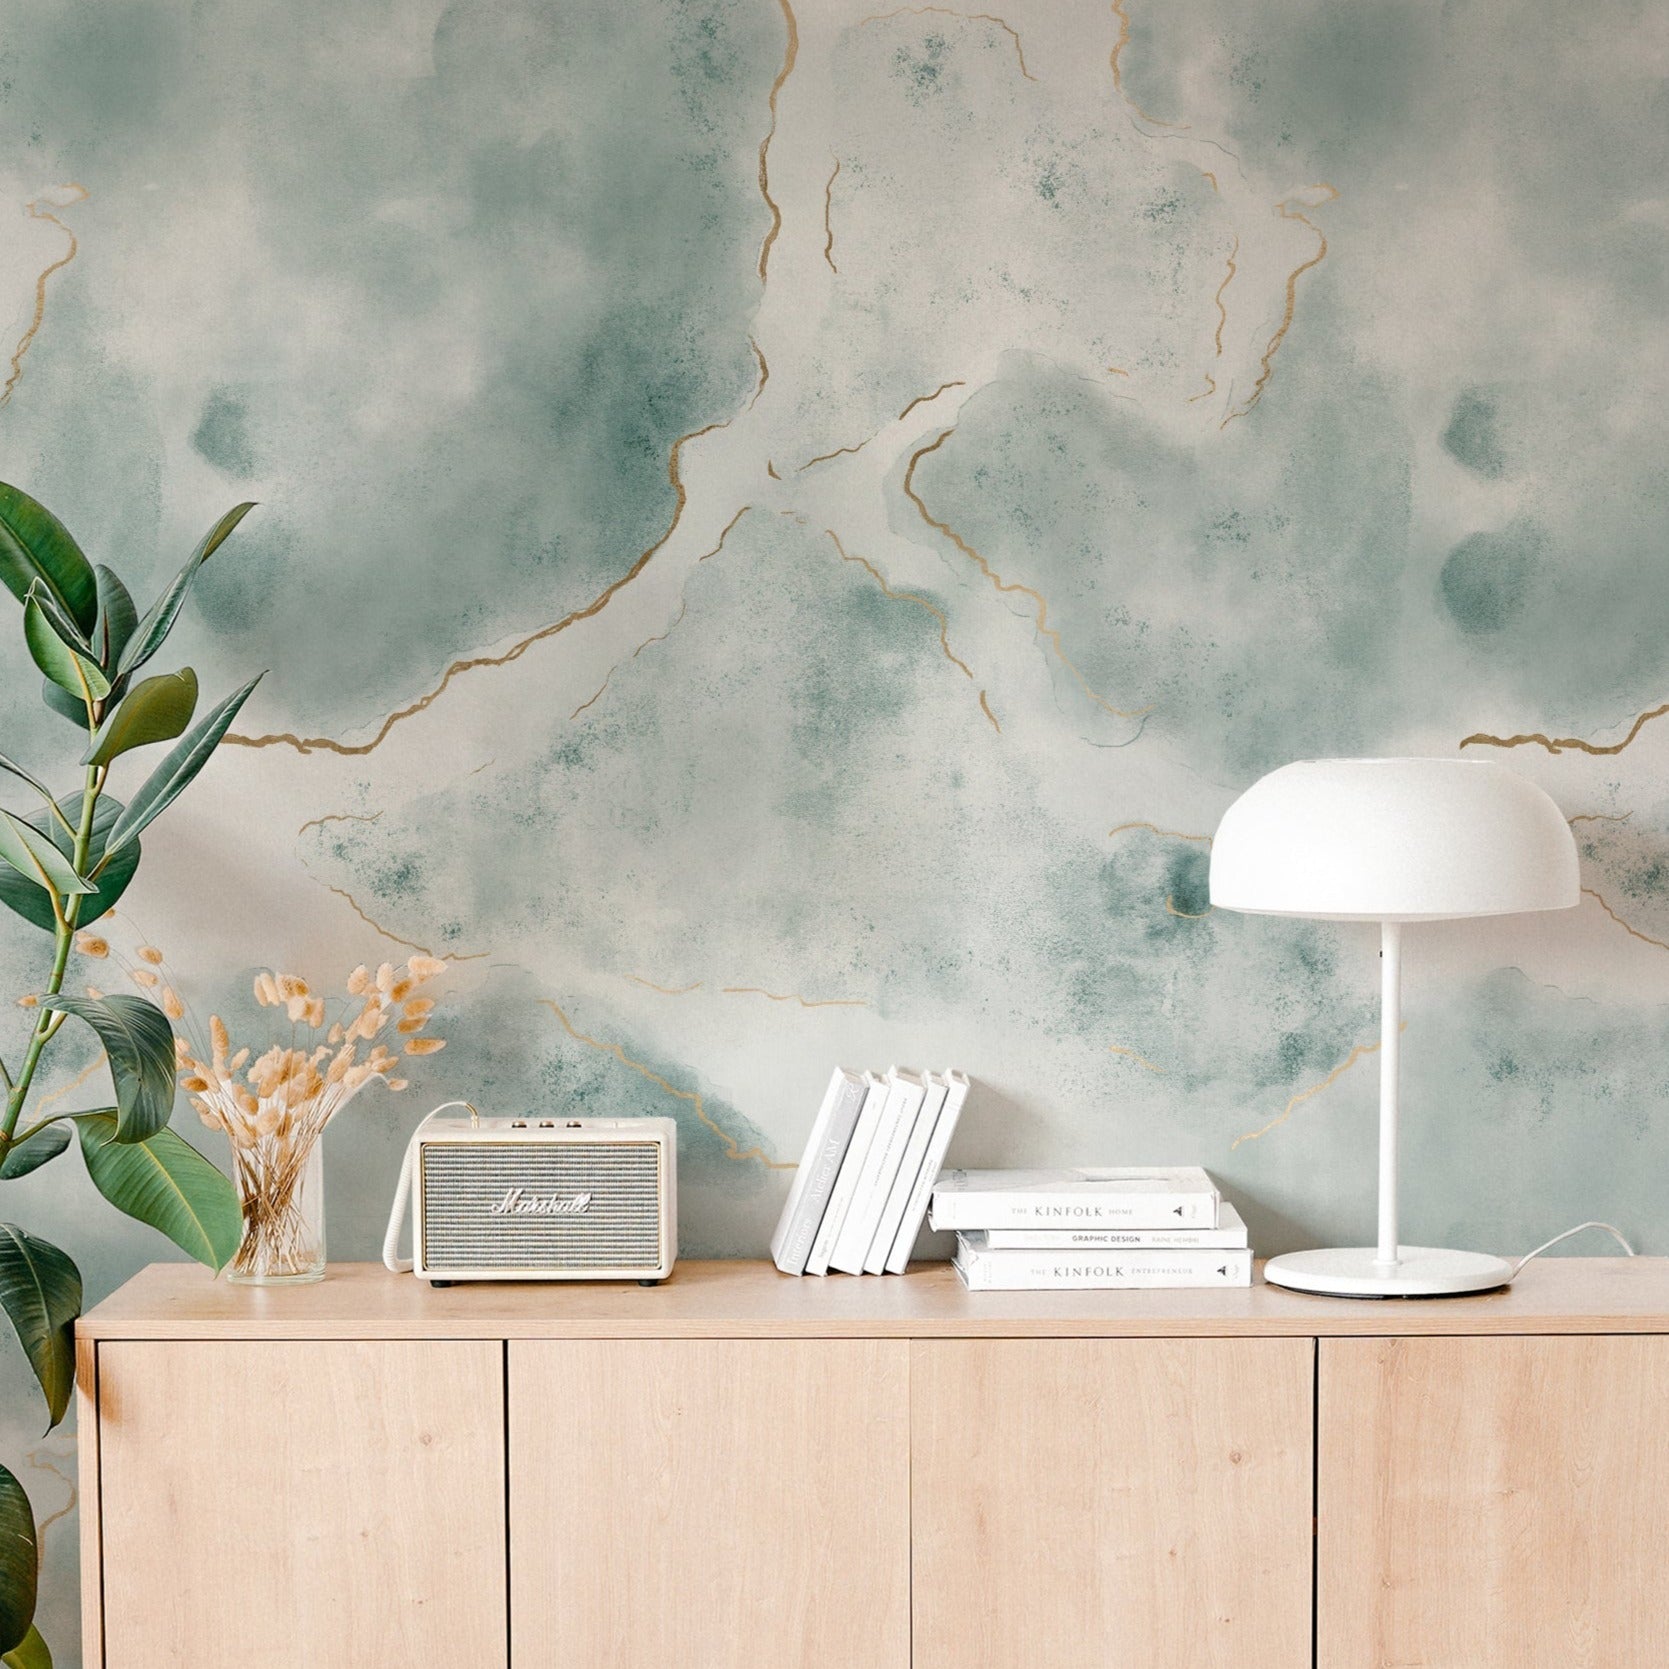 Stylish home office corner decorated with Shimmering Marble Wallpaper that exhibits a striking blue and green marble design with gold lines. The decor includes a white lamp, radio, and books on a modern wooden cabinet.